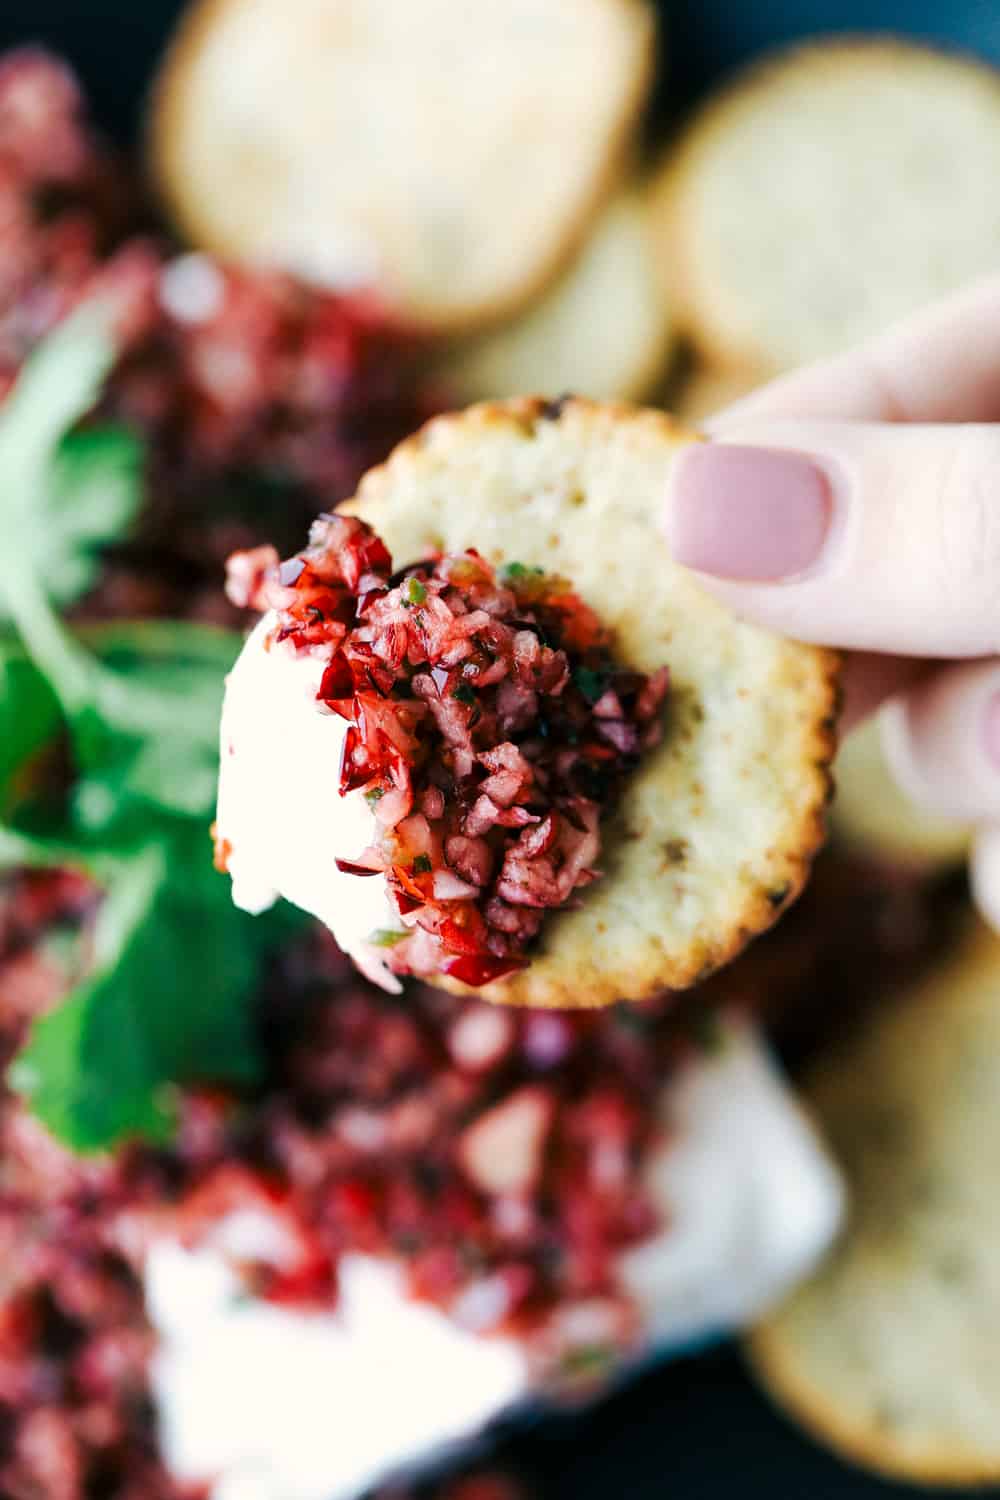 Cranberry salsa with cream cheese spread over a cracker.